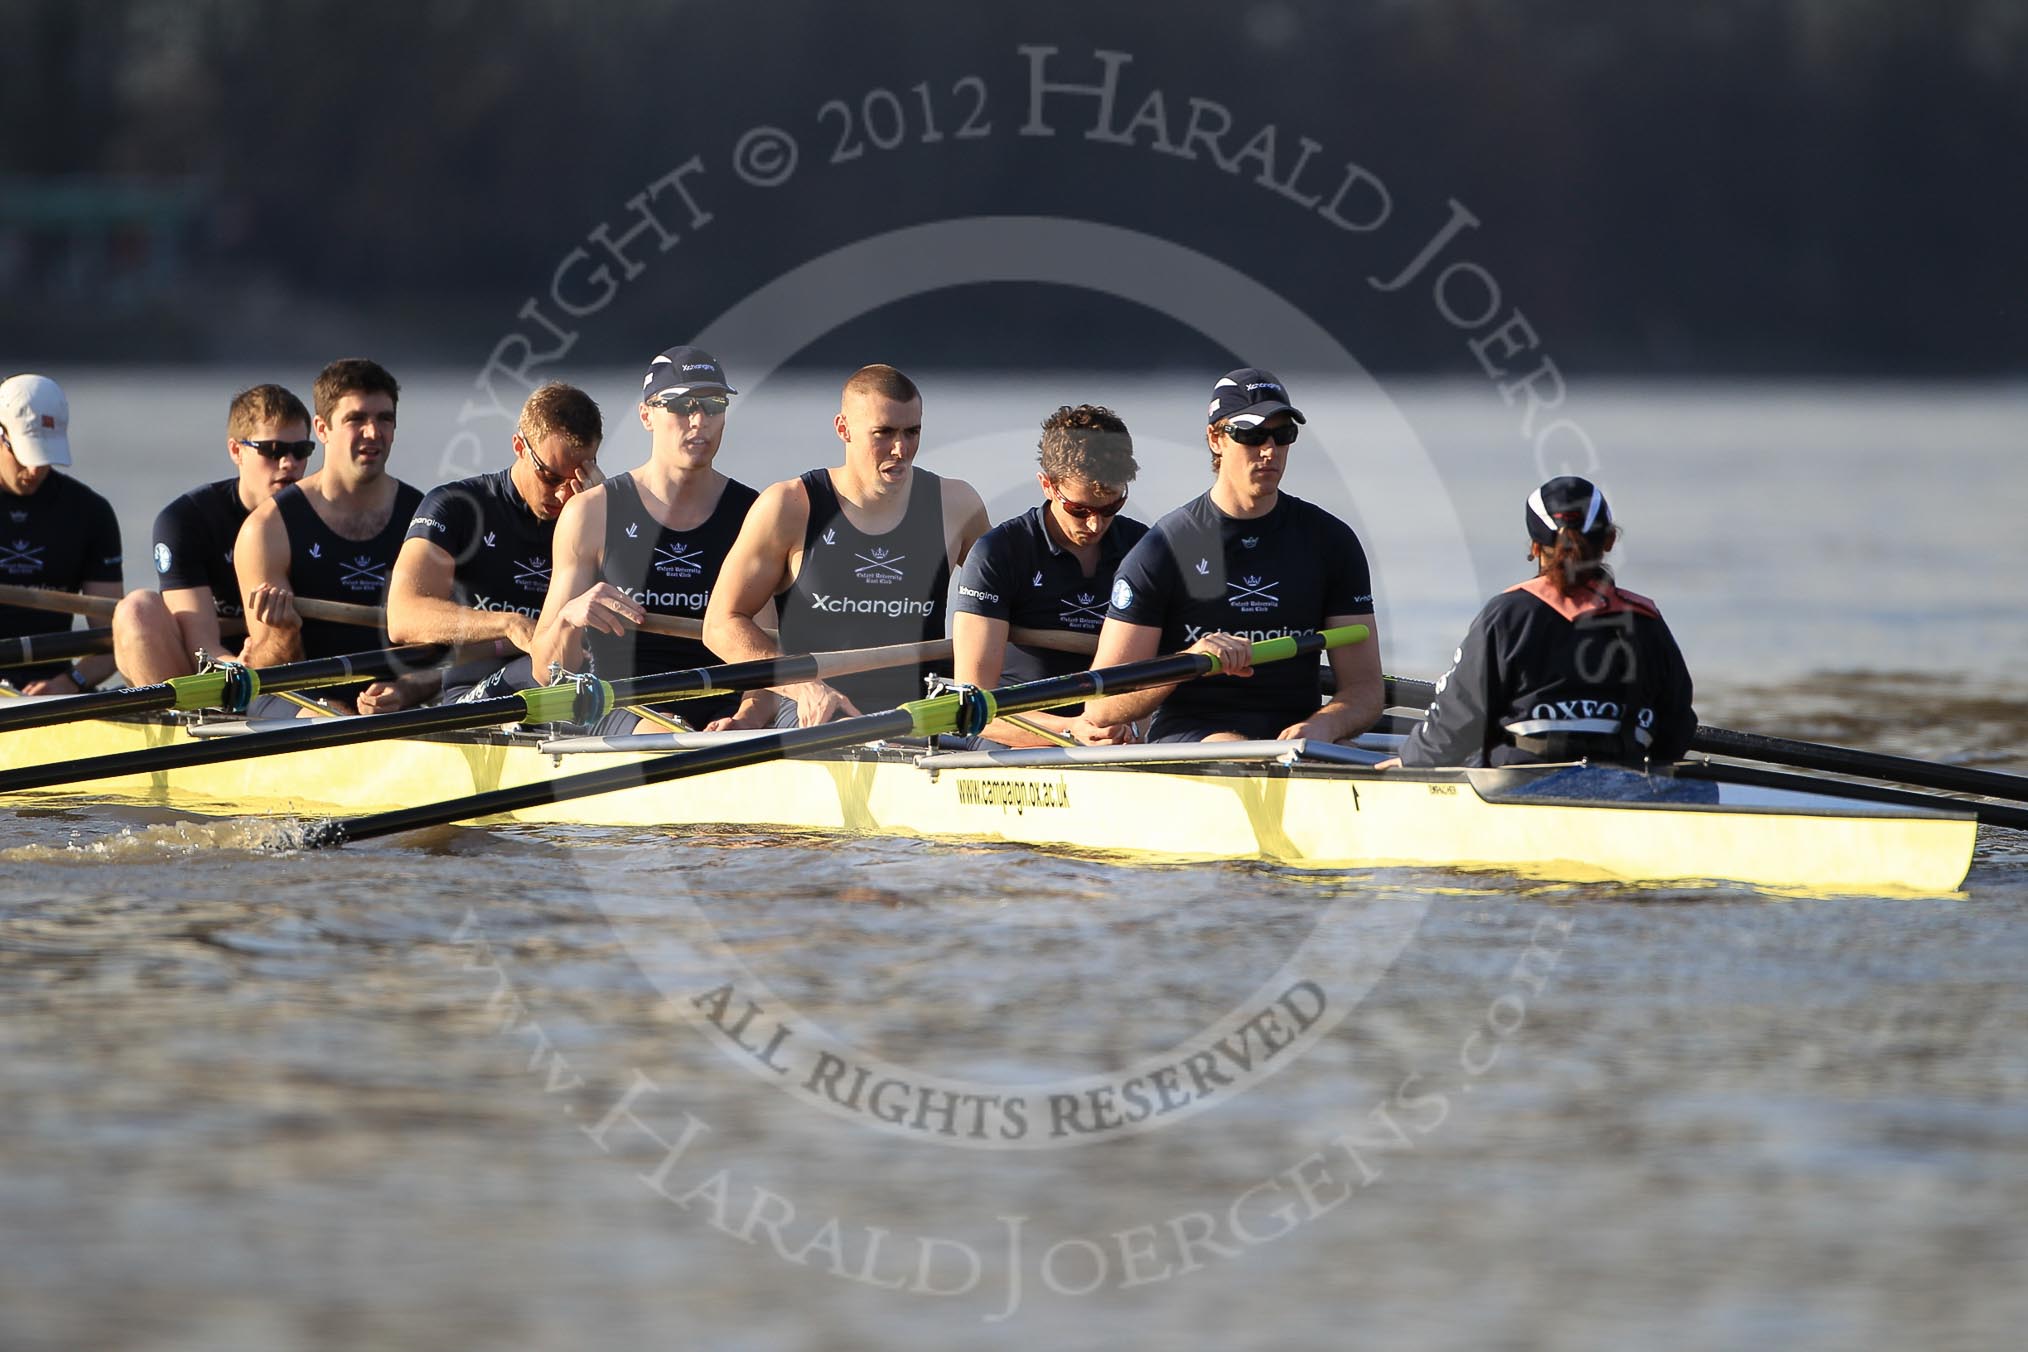 The Boat Race season 2012 - fixture OUBC vs German U23: The Oxford Blue Boat - from left to right Bow Dr. Alexander Woods, Geordie MacLeod, Kevin Baum, Dr. Hanno Wienhausen, Karl Hudspith, Alex Davidson, Dan Harvey, Stern Roel Haen, and Cox Zoe de Toledo..
River Thames between Putney and Mortlake,
London,

United Kingdom,
on 26 February 2012 at 15:24, image #37